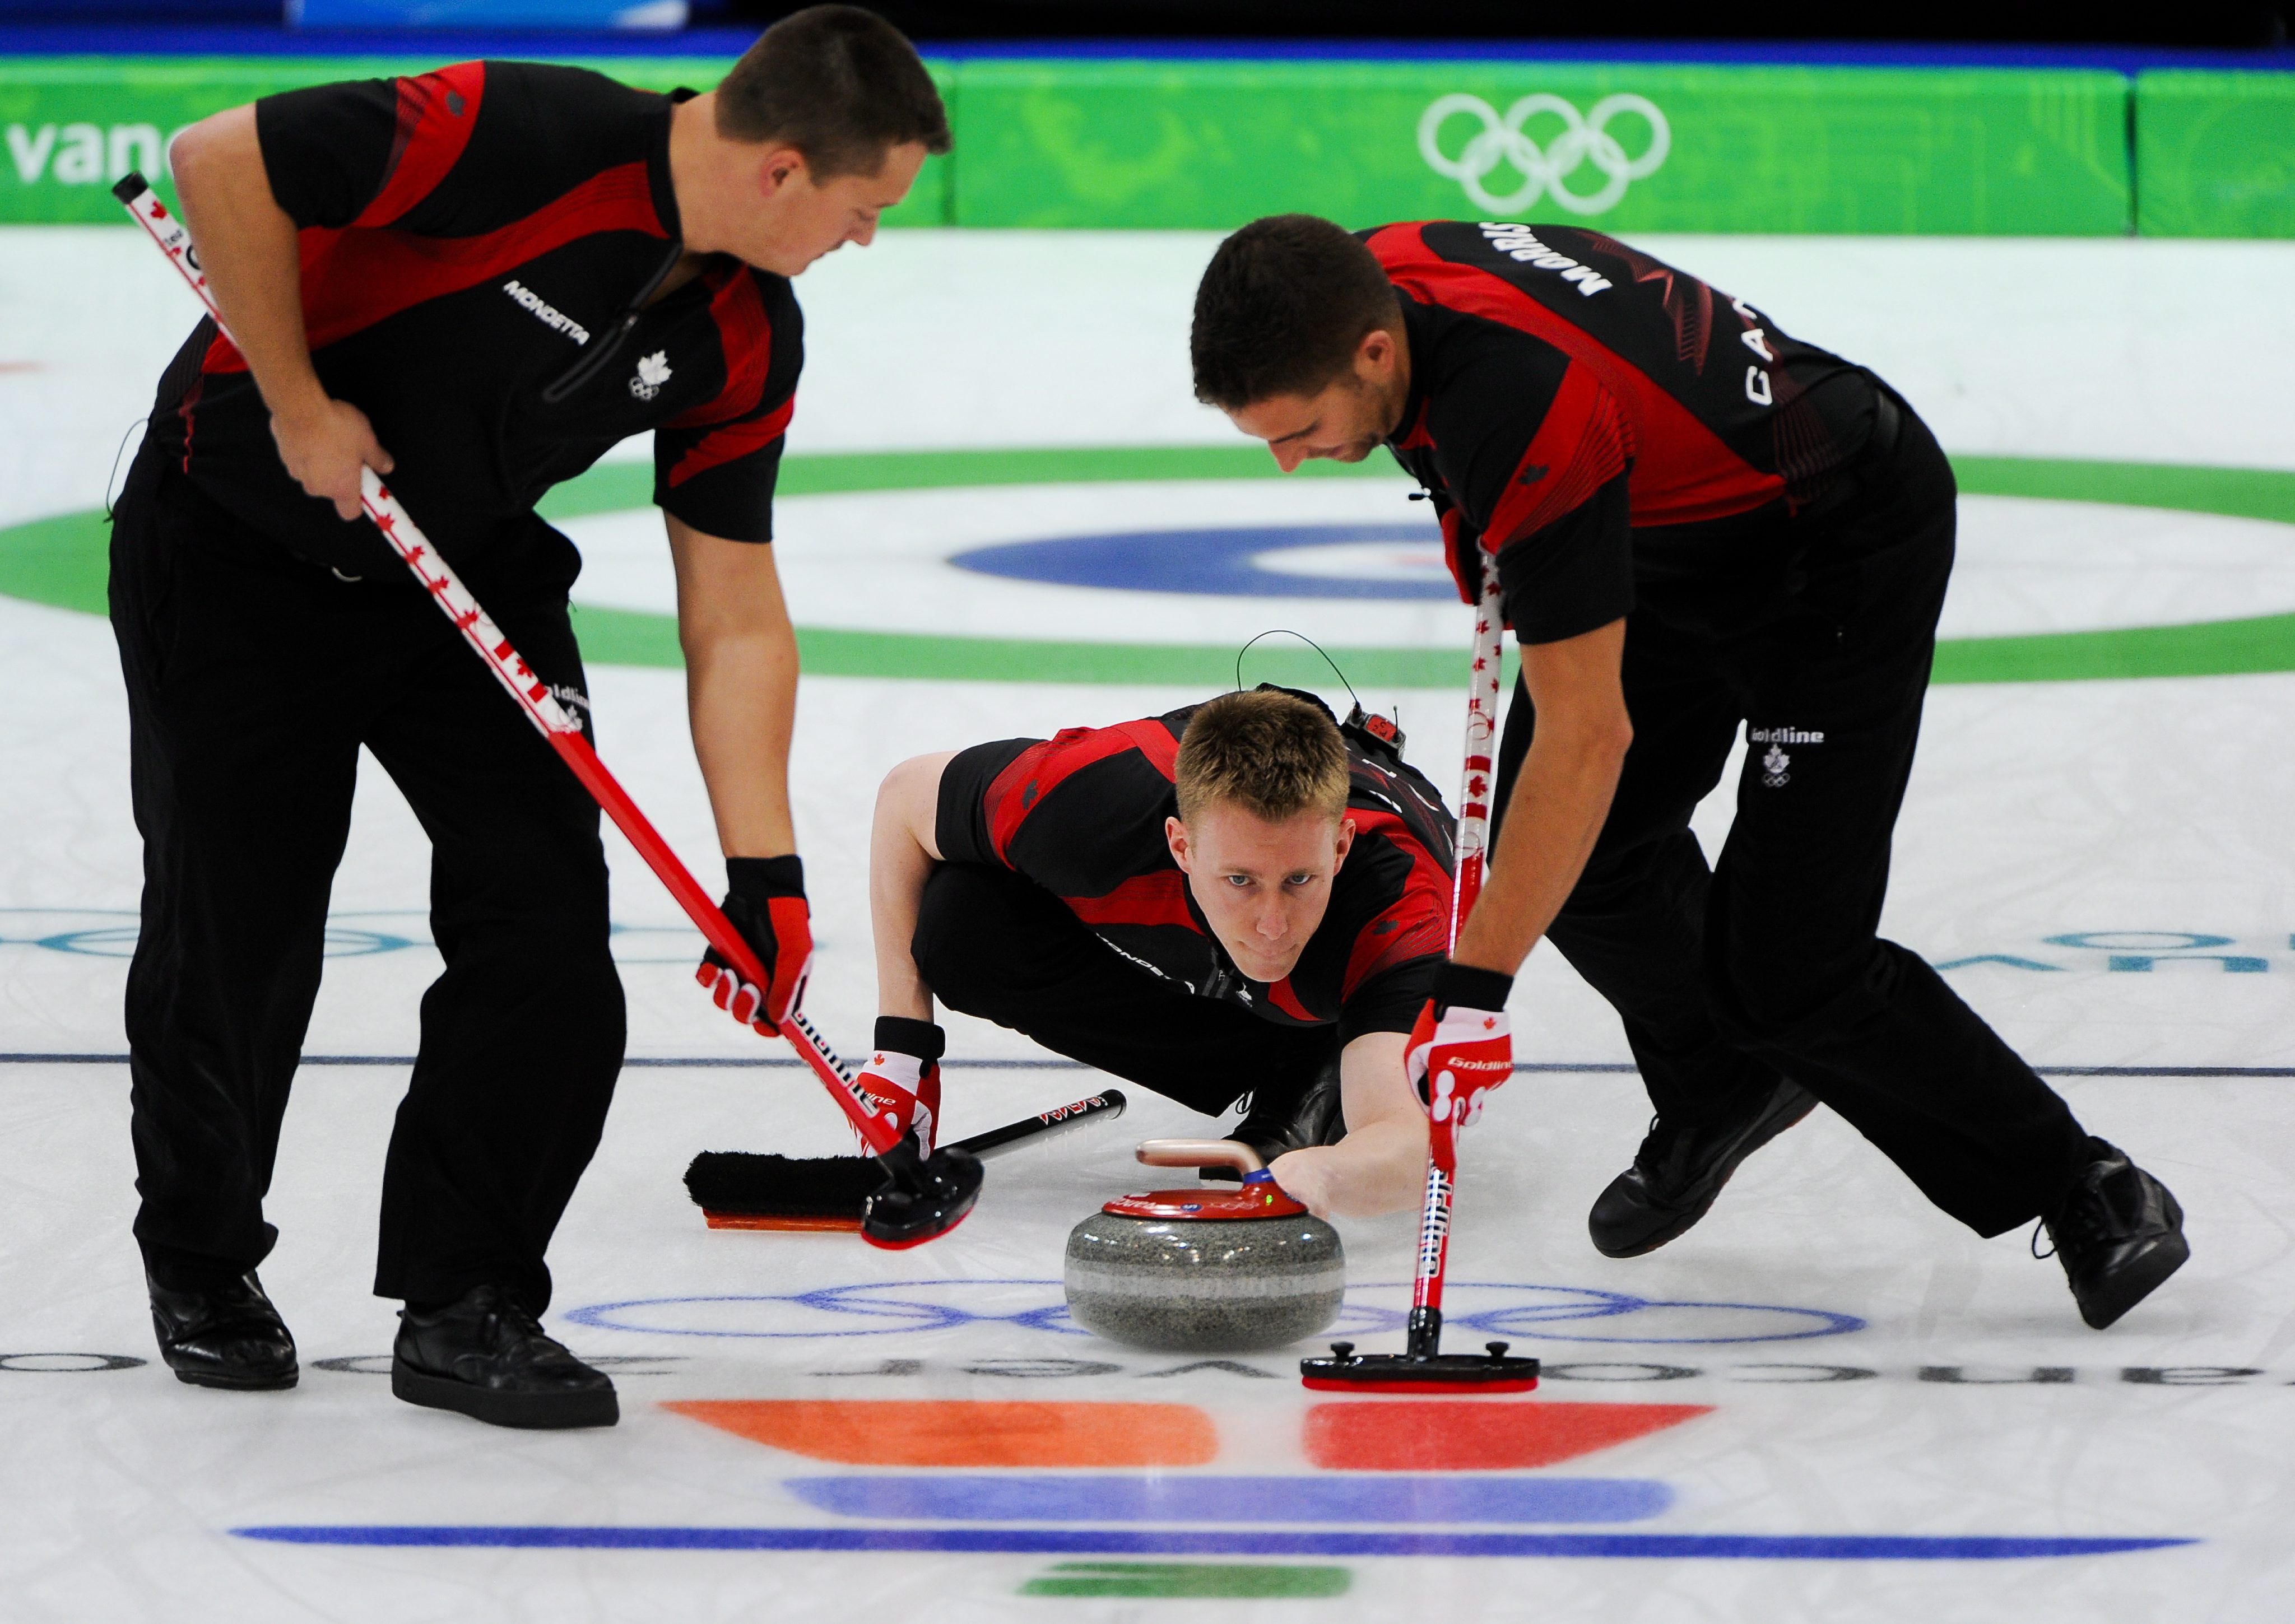 Canada's Mark Kennedy fires a stone between teammates Ben Herbert (B) and John Morris (J) in the Vancouver Winter Olympics men's curling championship final against Norway on February 27, 2010 in Vancouver.  Canada won 6-3 and won a gold medal.  Photo: MTI/EPA/Tannen Maury